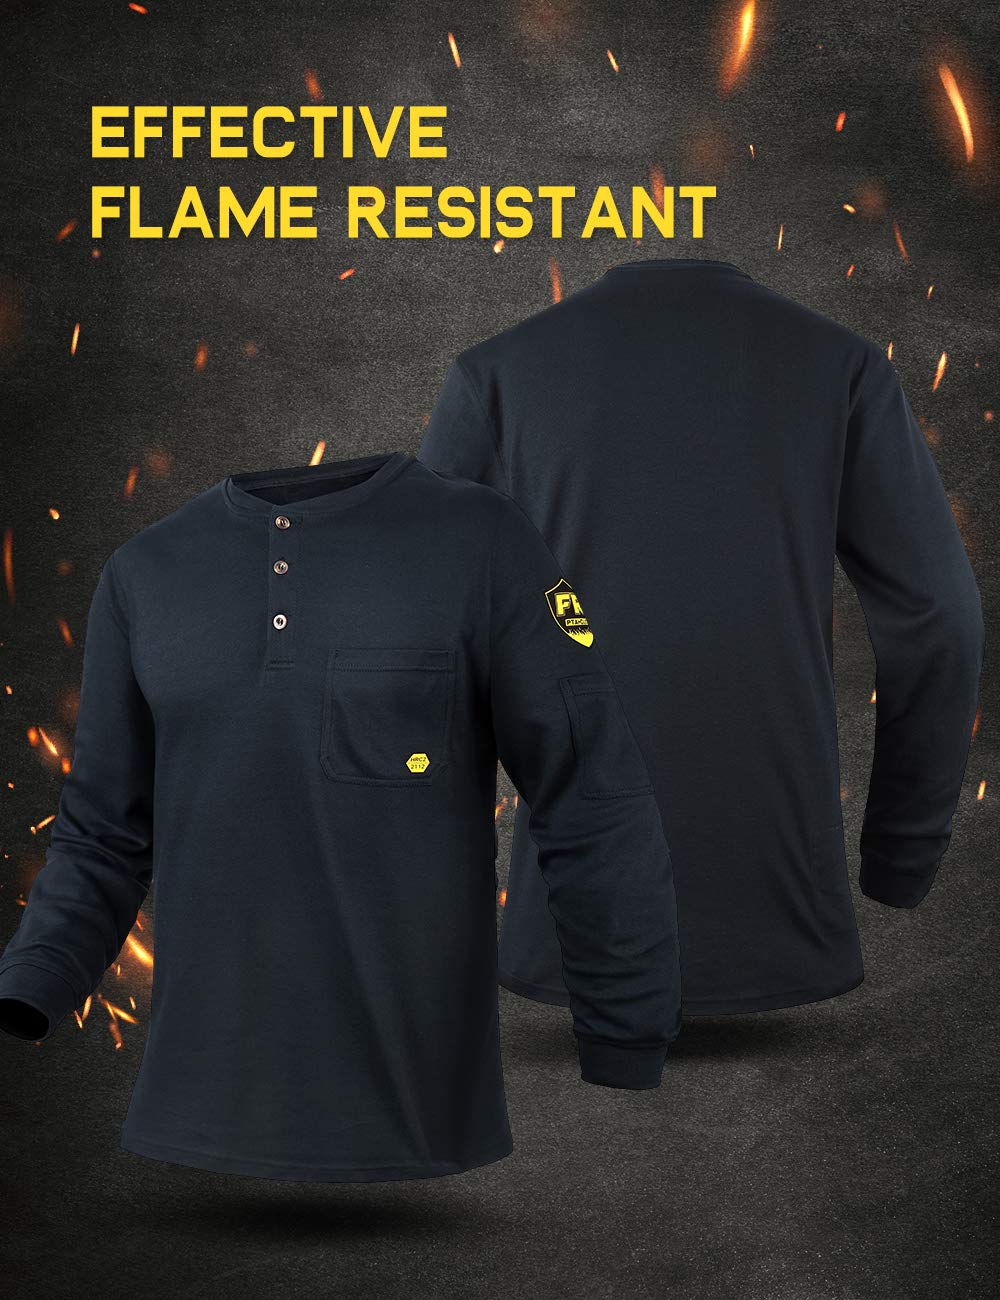 PTAHDUS FR Shirts Men’s Flame Resistant Long Sleeve Henley Shirts, 7.1 Ounce 100% Cotton FR Workwear Clothing for Men